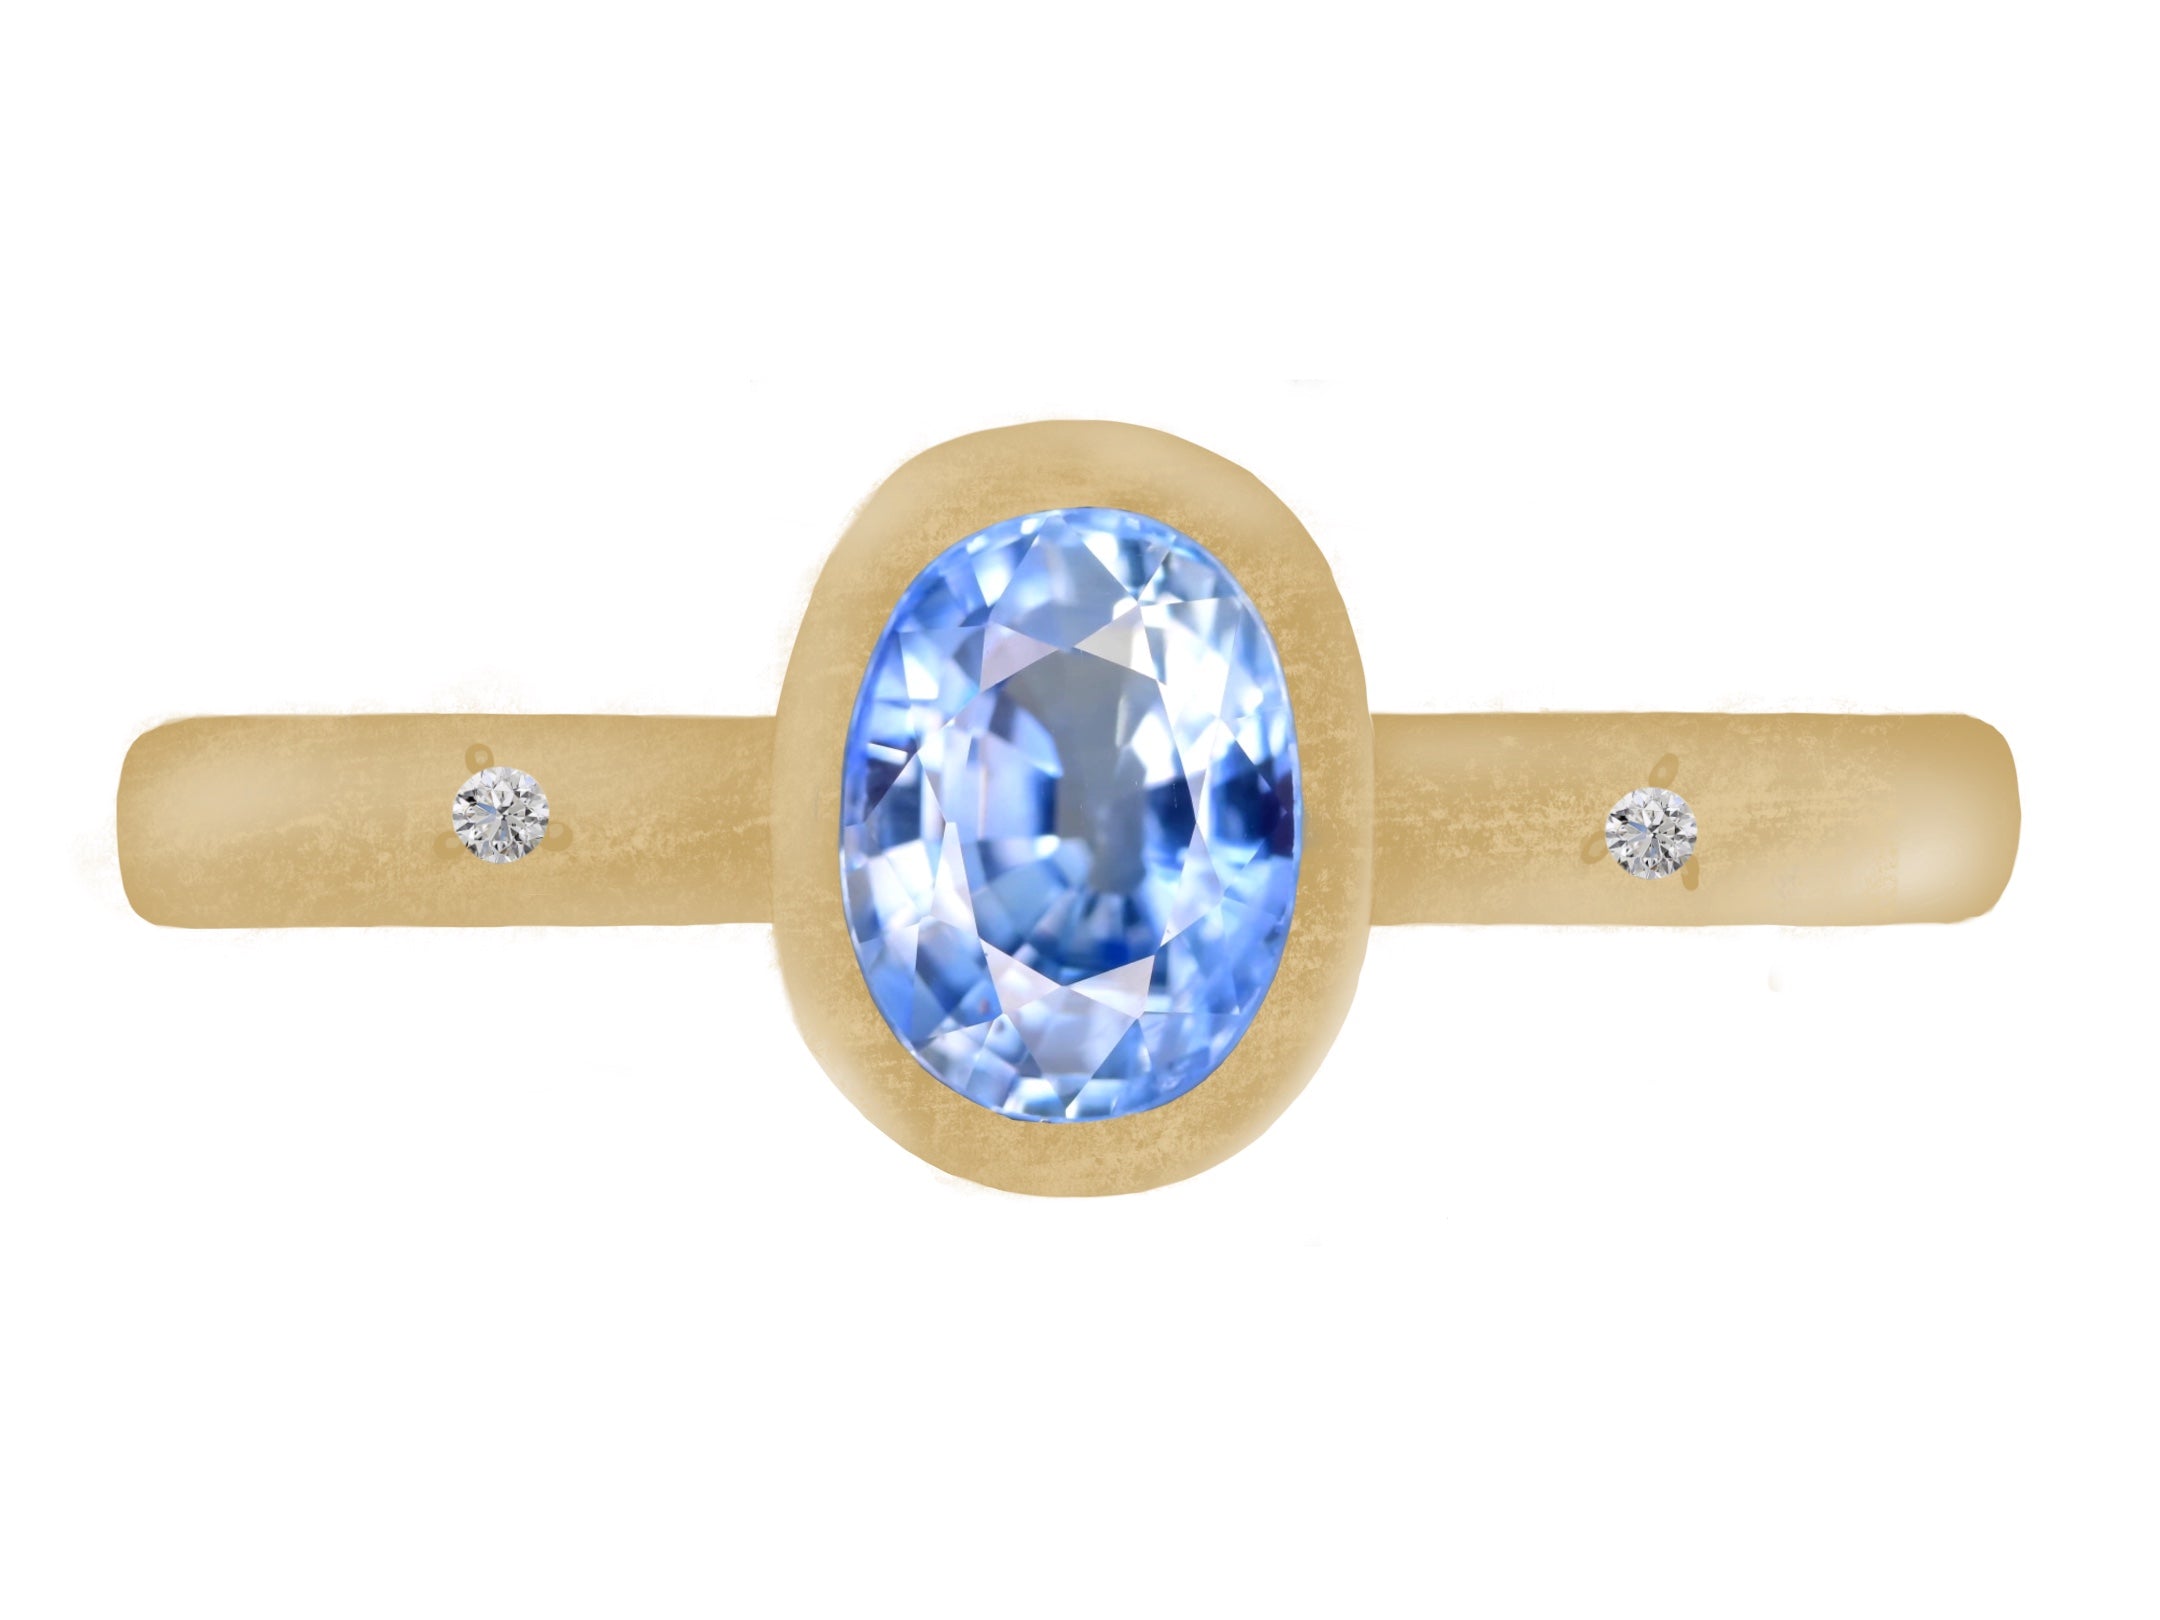 50% deposit - Custom 18ct yellow gold ring with 1.75ct sapphire & two conflict free natural diamonds